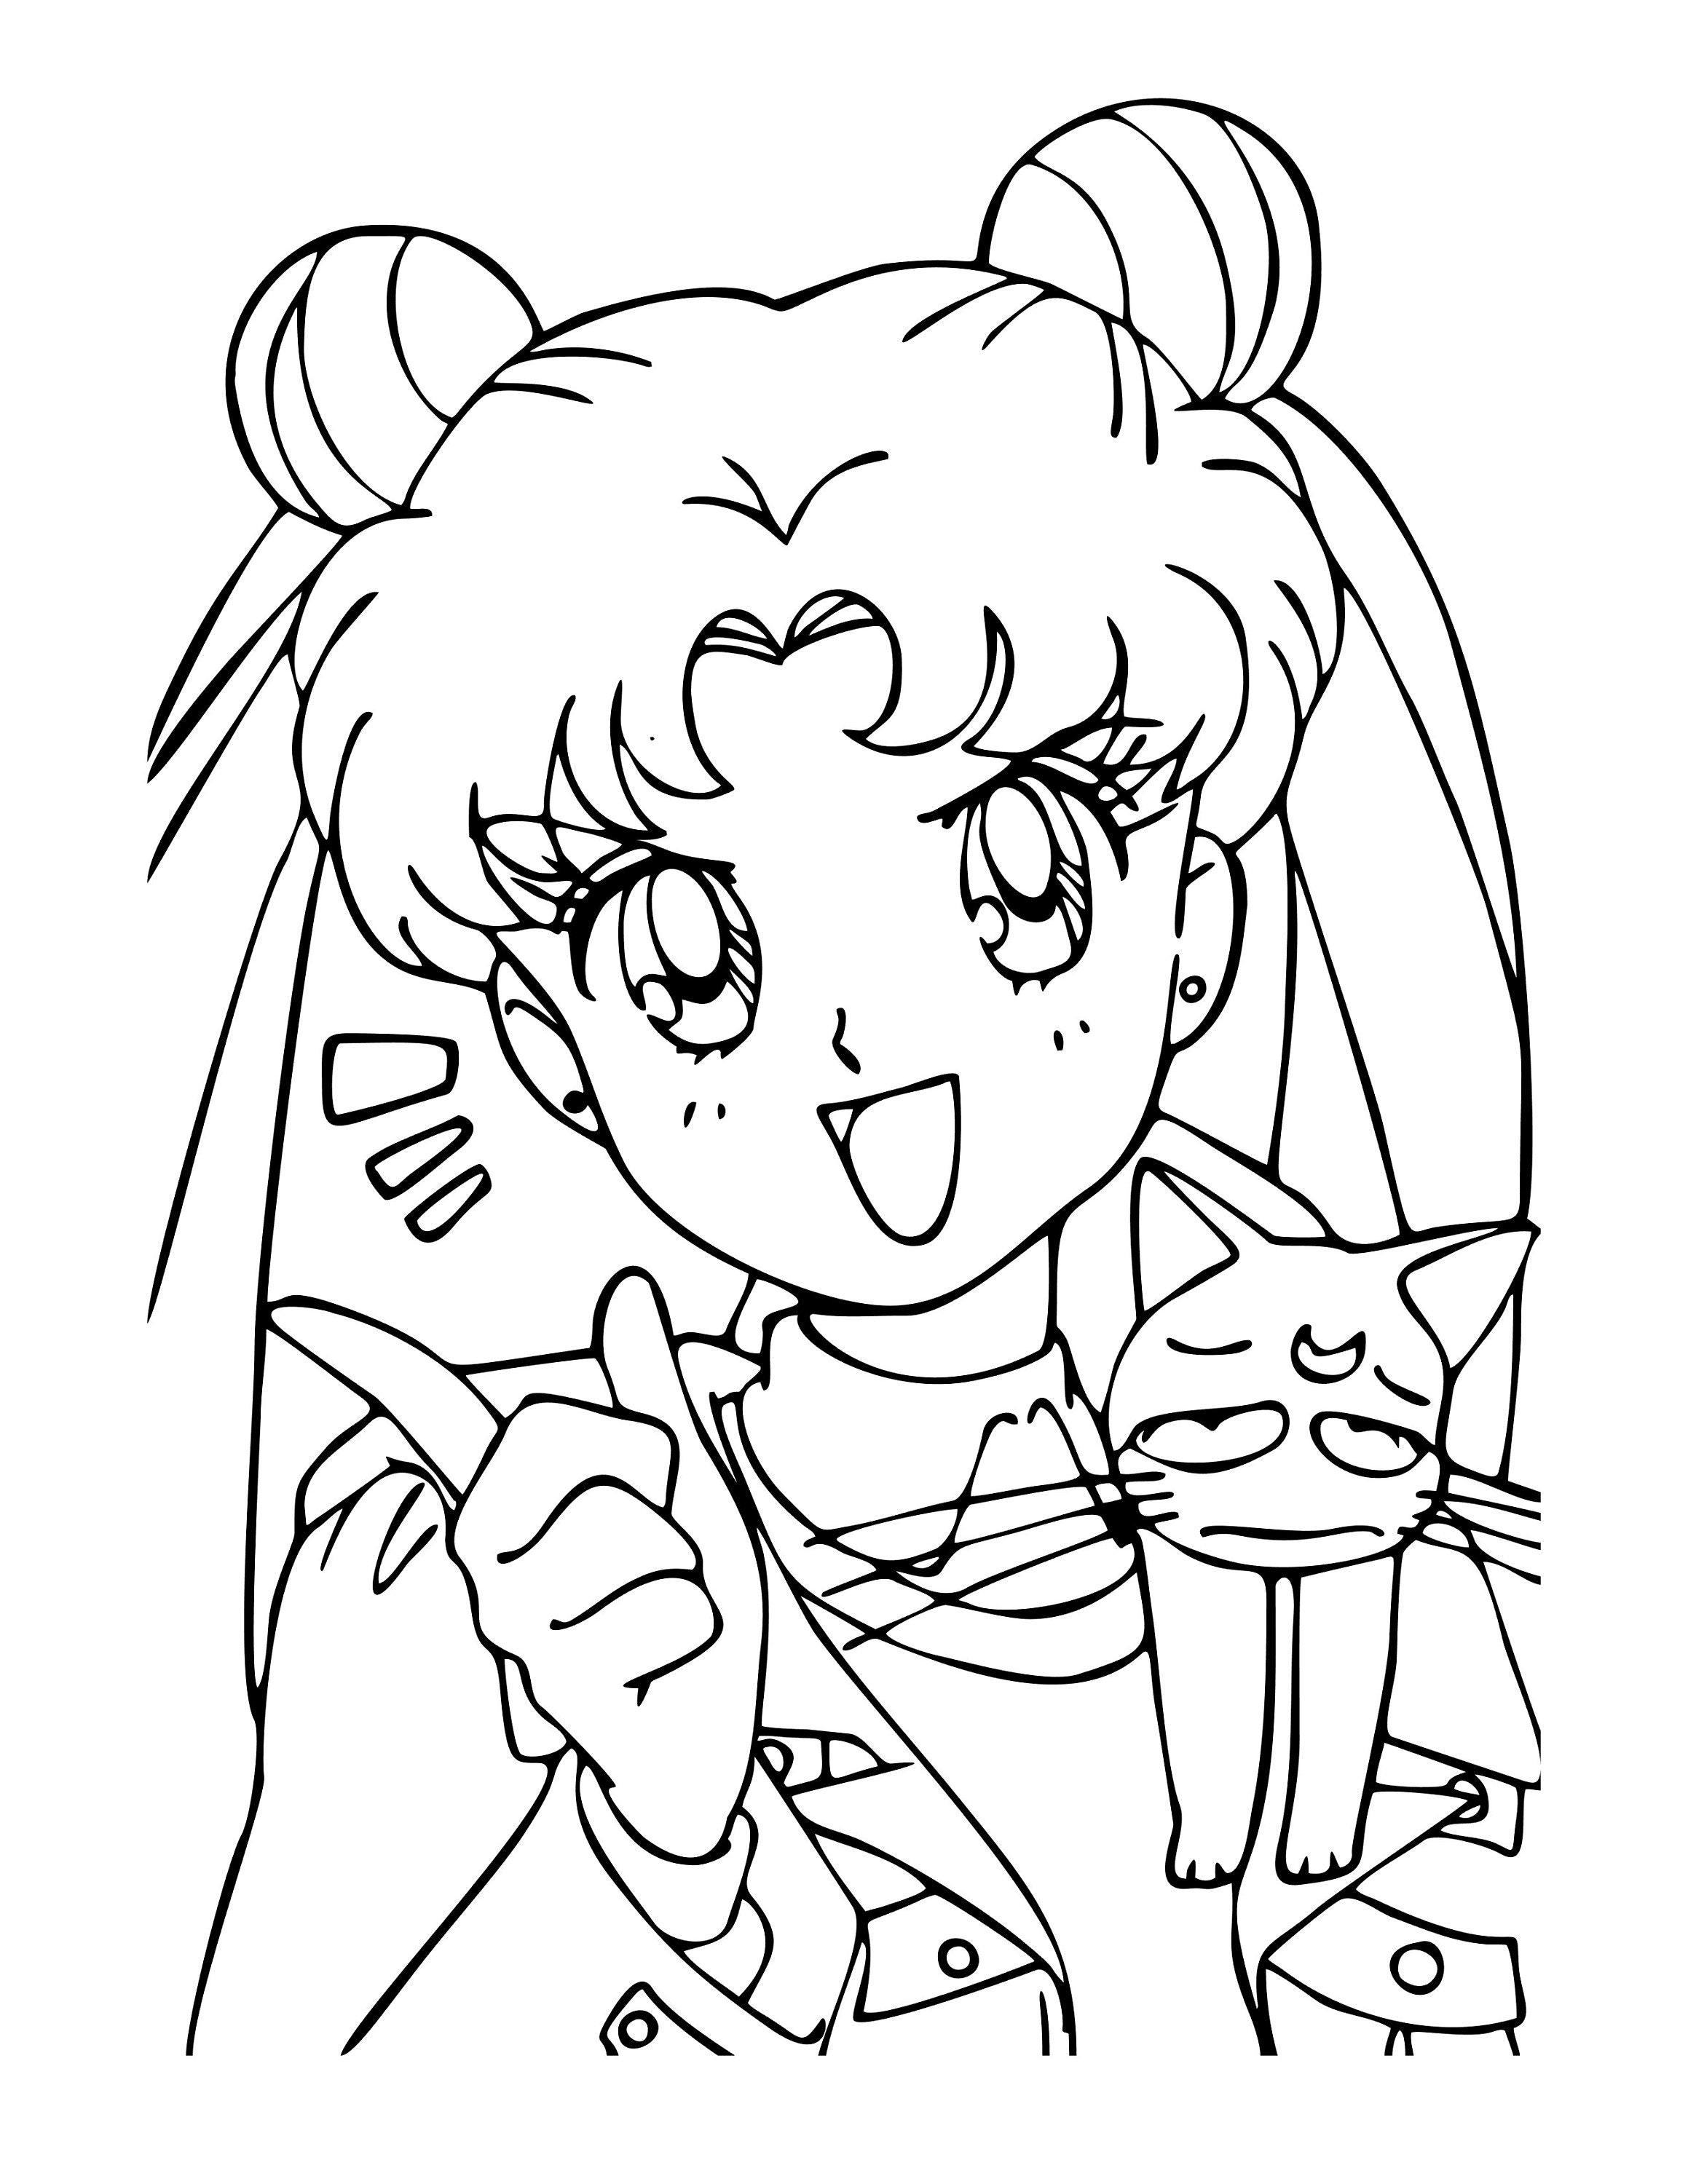 Sailor Moon Anime Coloring Pages Fun for kids and all ages   Etsy.de